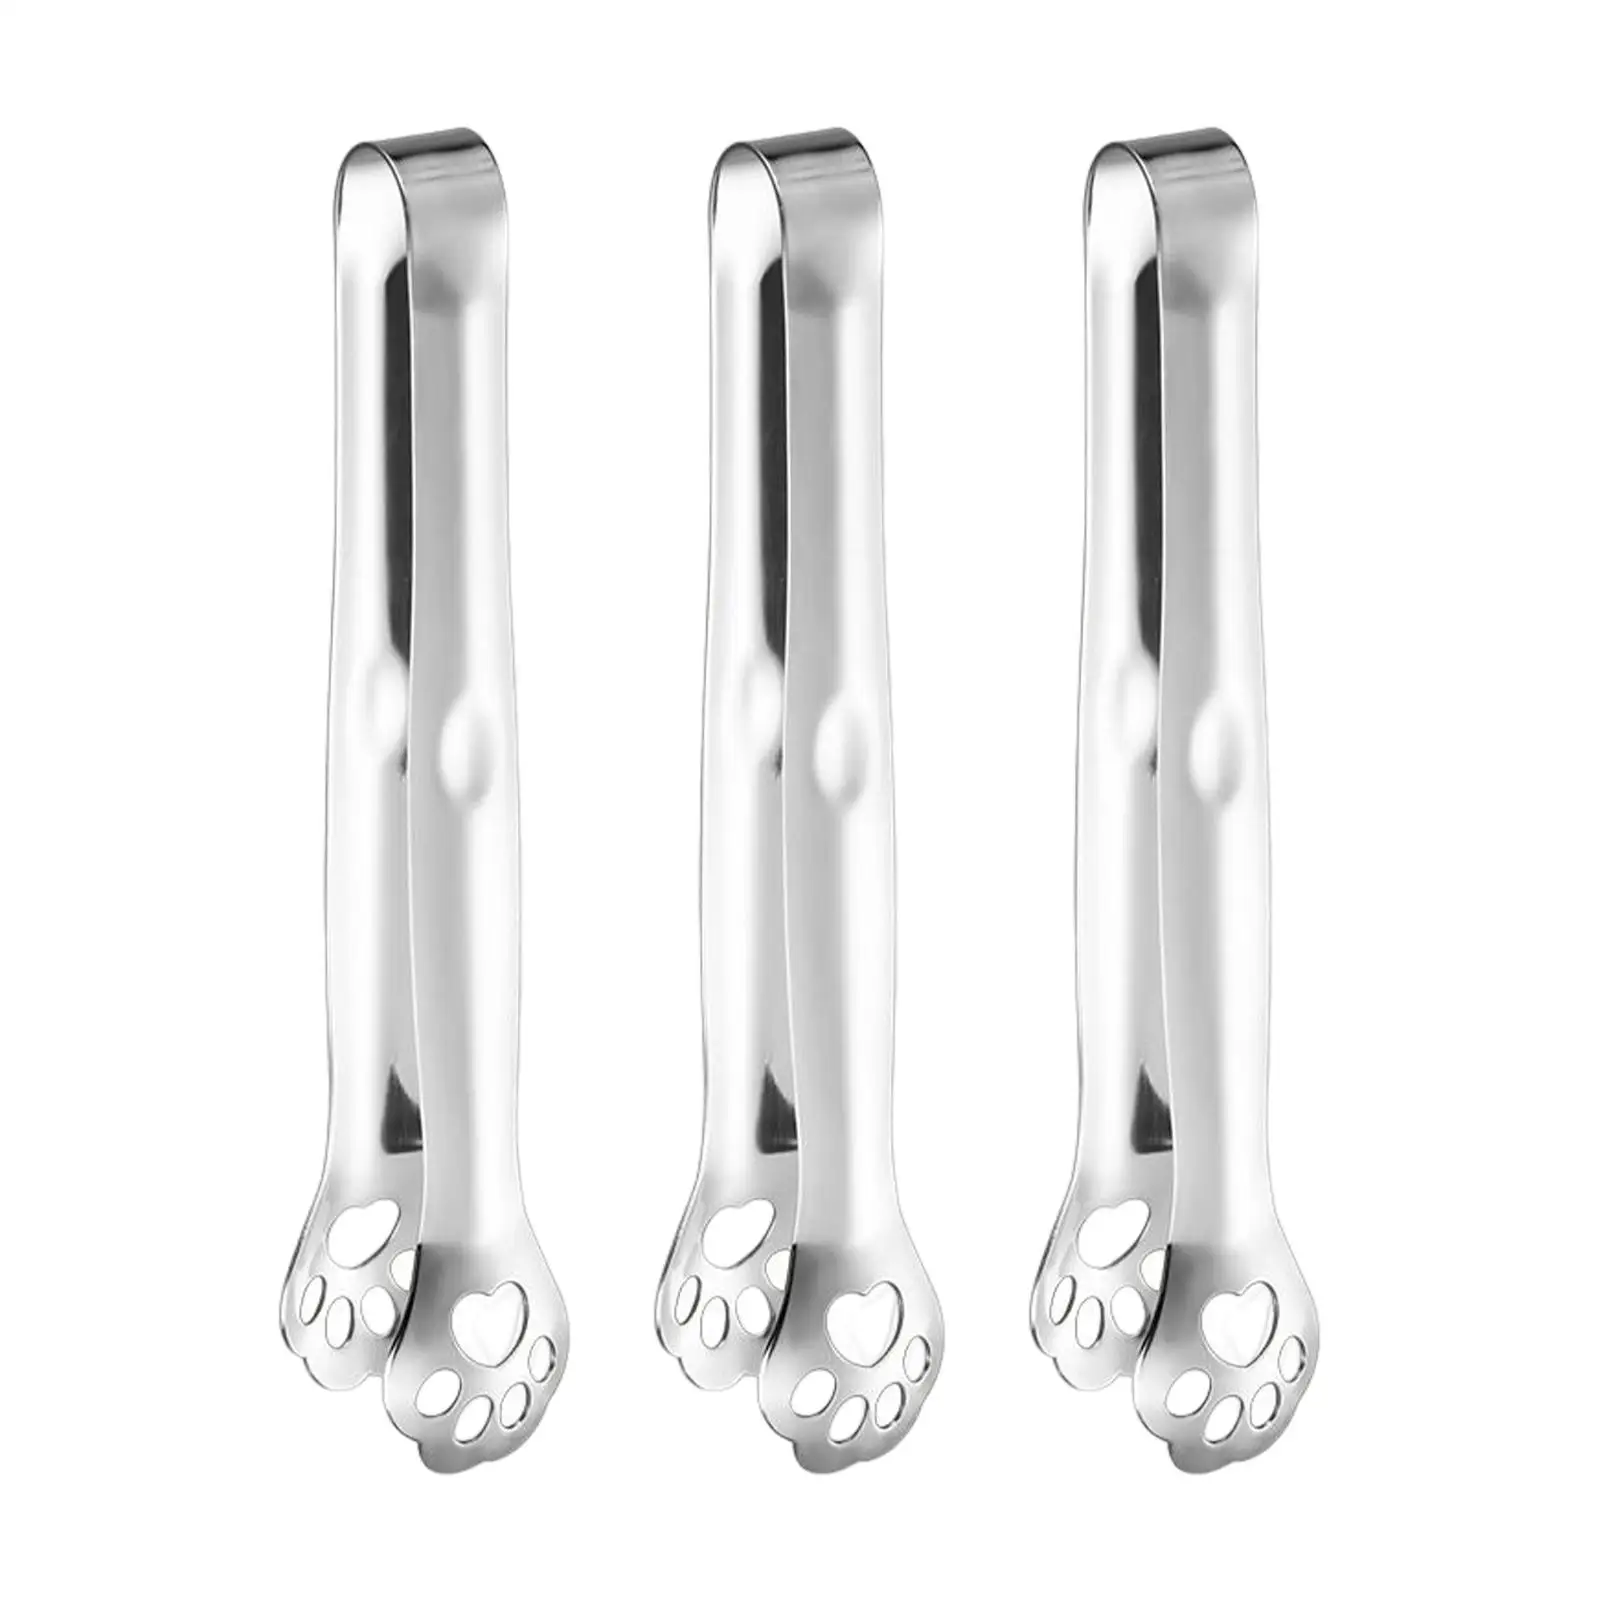 3x Stainless Steel Food Clips Baking Bread Clamp for Frying 